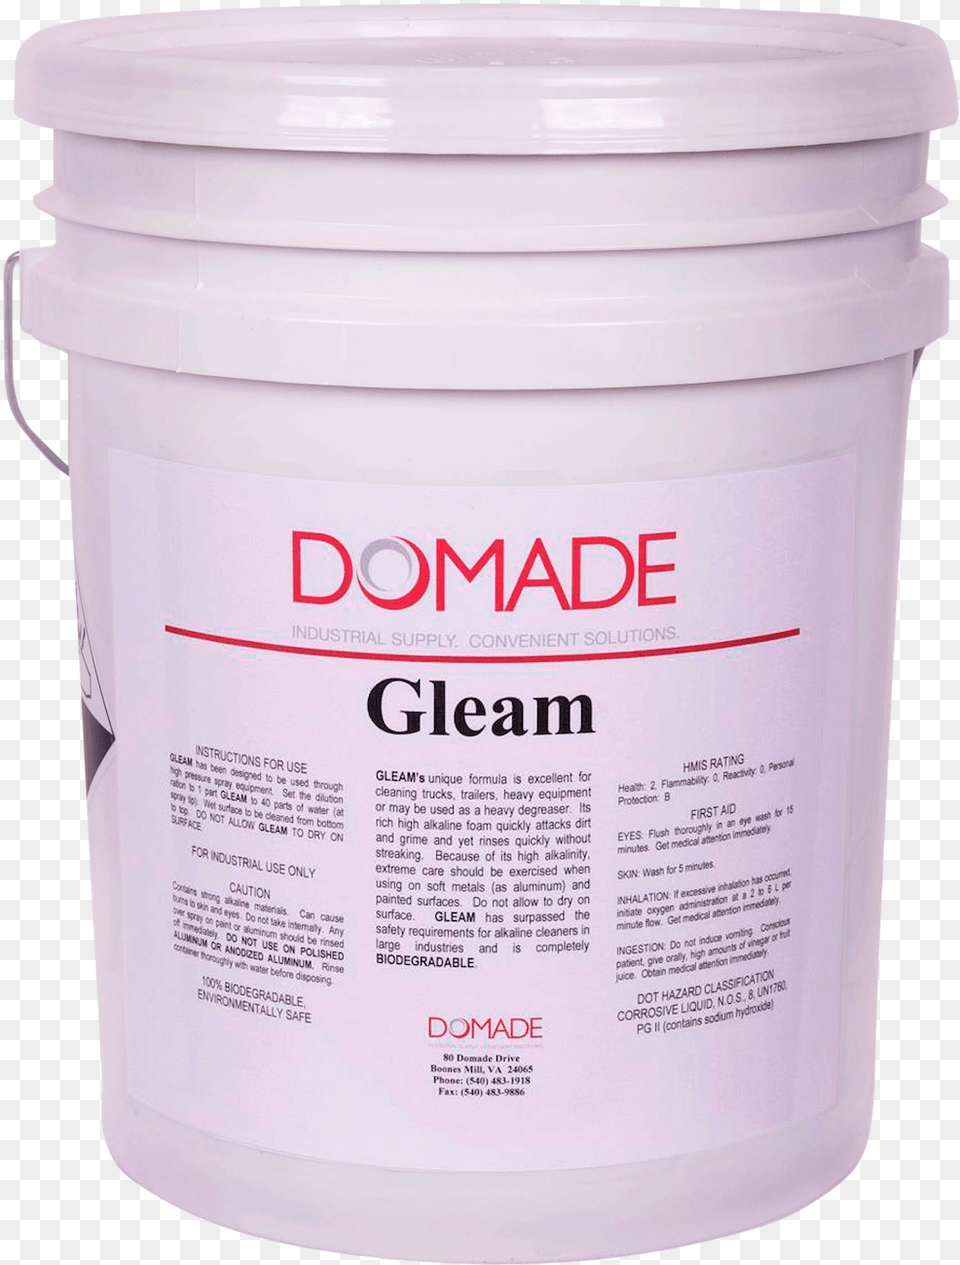 Gleam Hd Alkaline Dunamis, Paint Container, Bucket Png